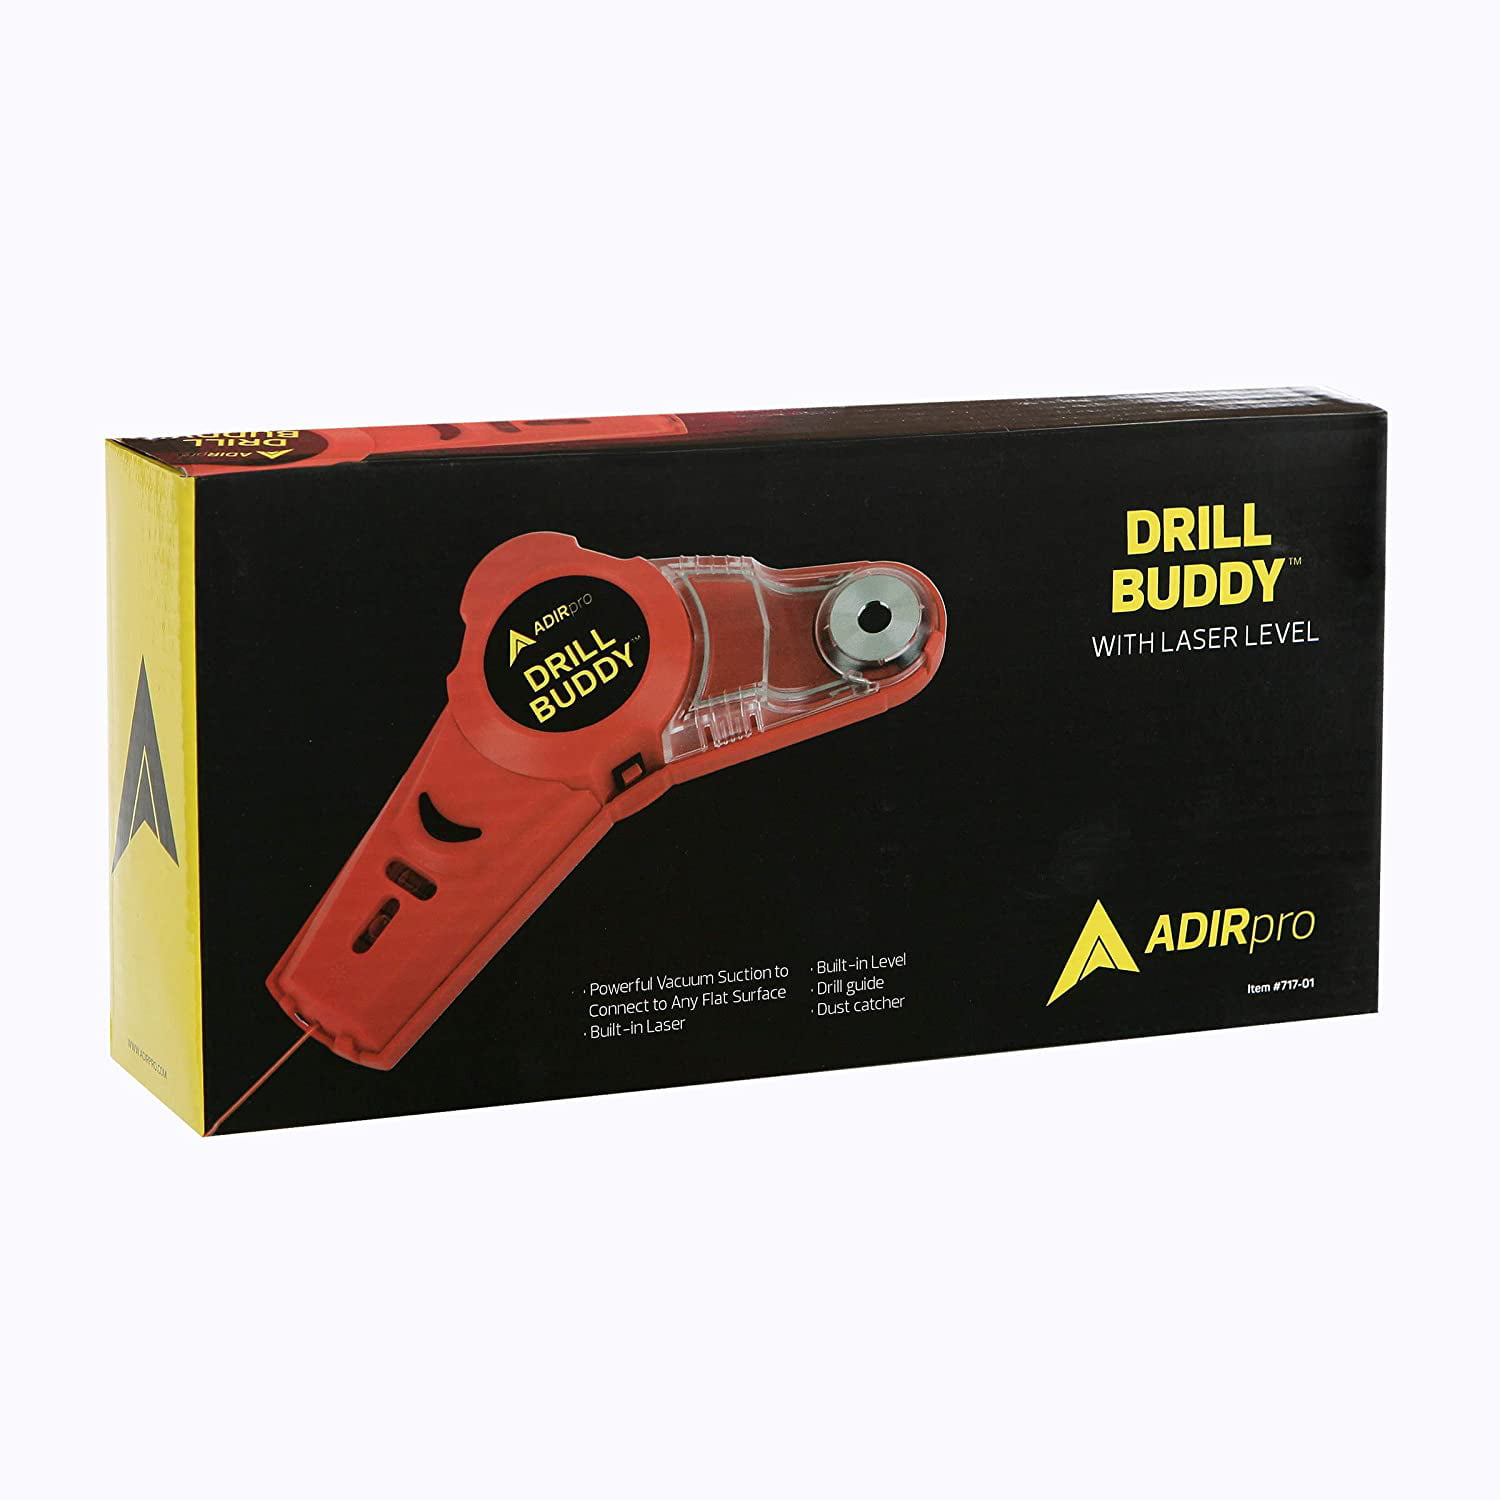 AdirPro Drill Buddy Cordless Dust Collector with Laser Level and Bubble Vial 